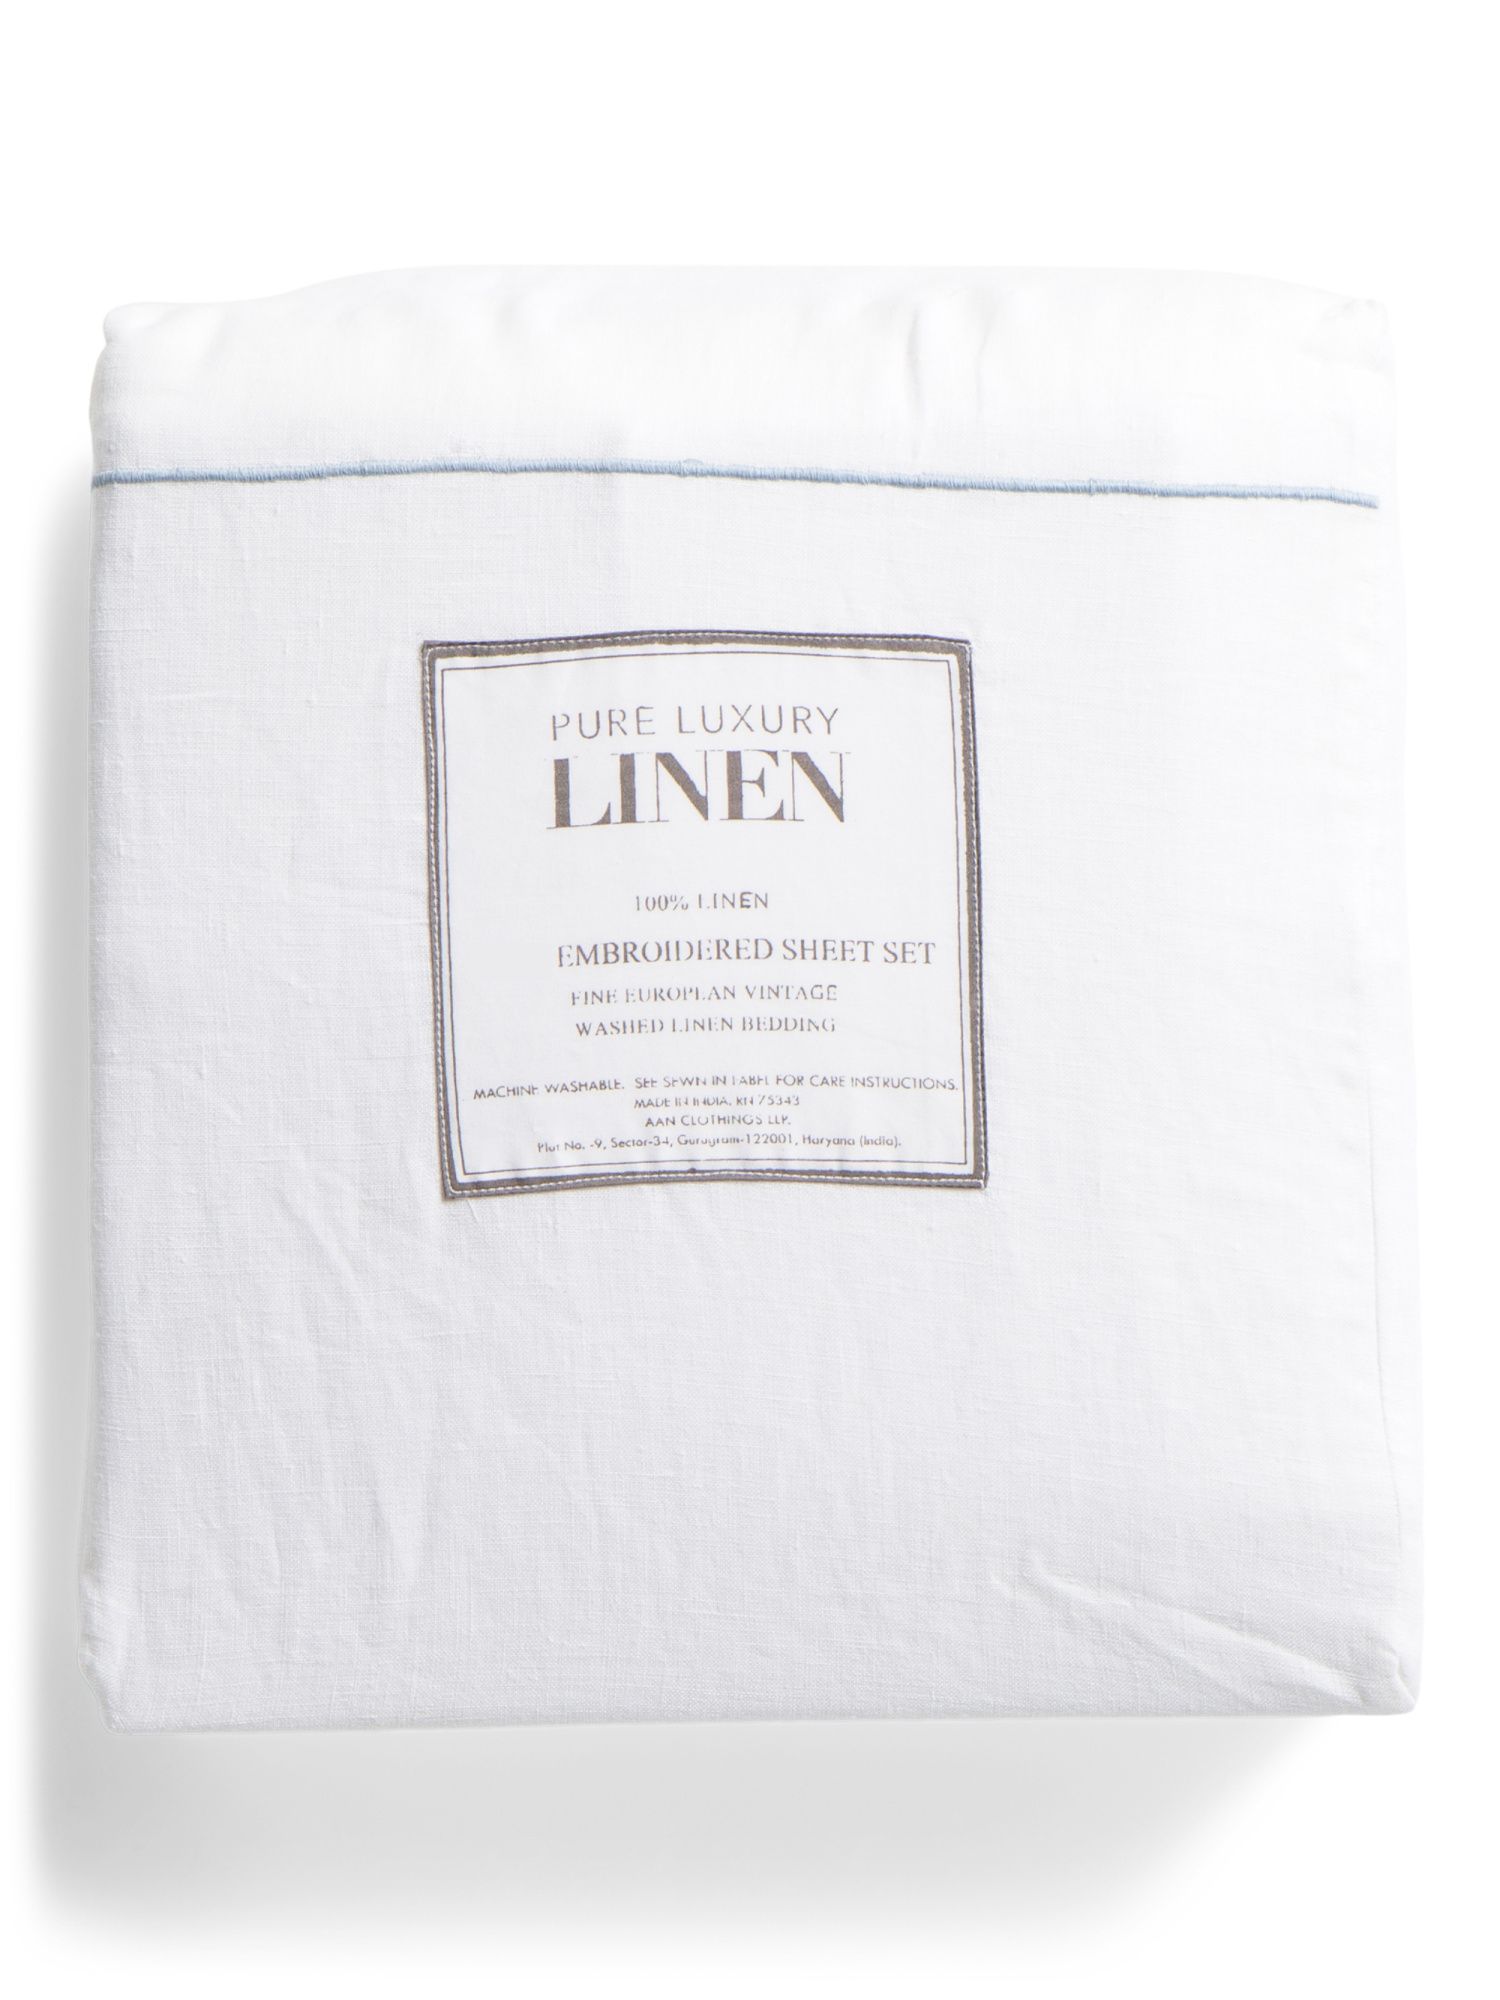 Made In India Linen Sheet Set With Merrow Stitching | TJ Maxx